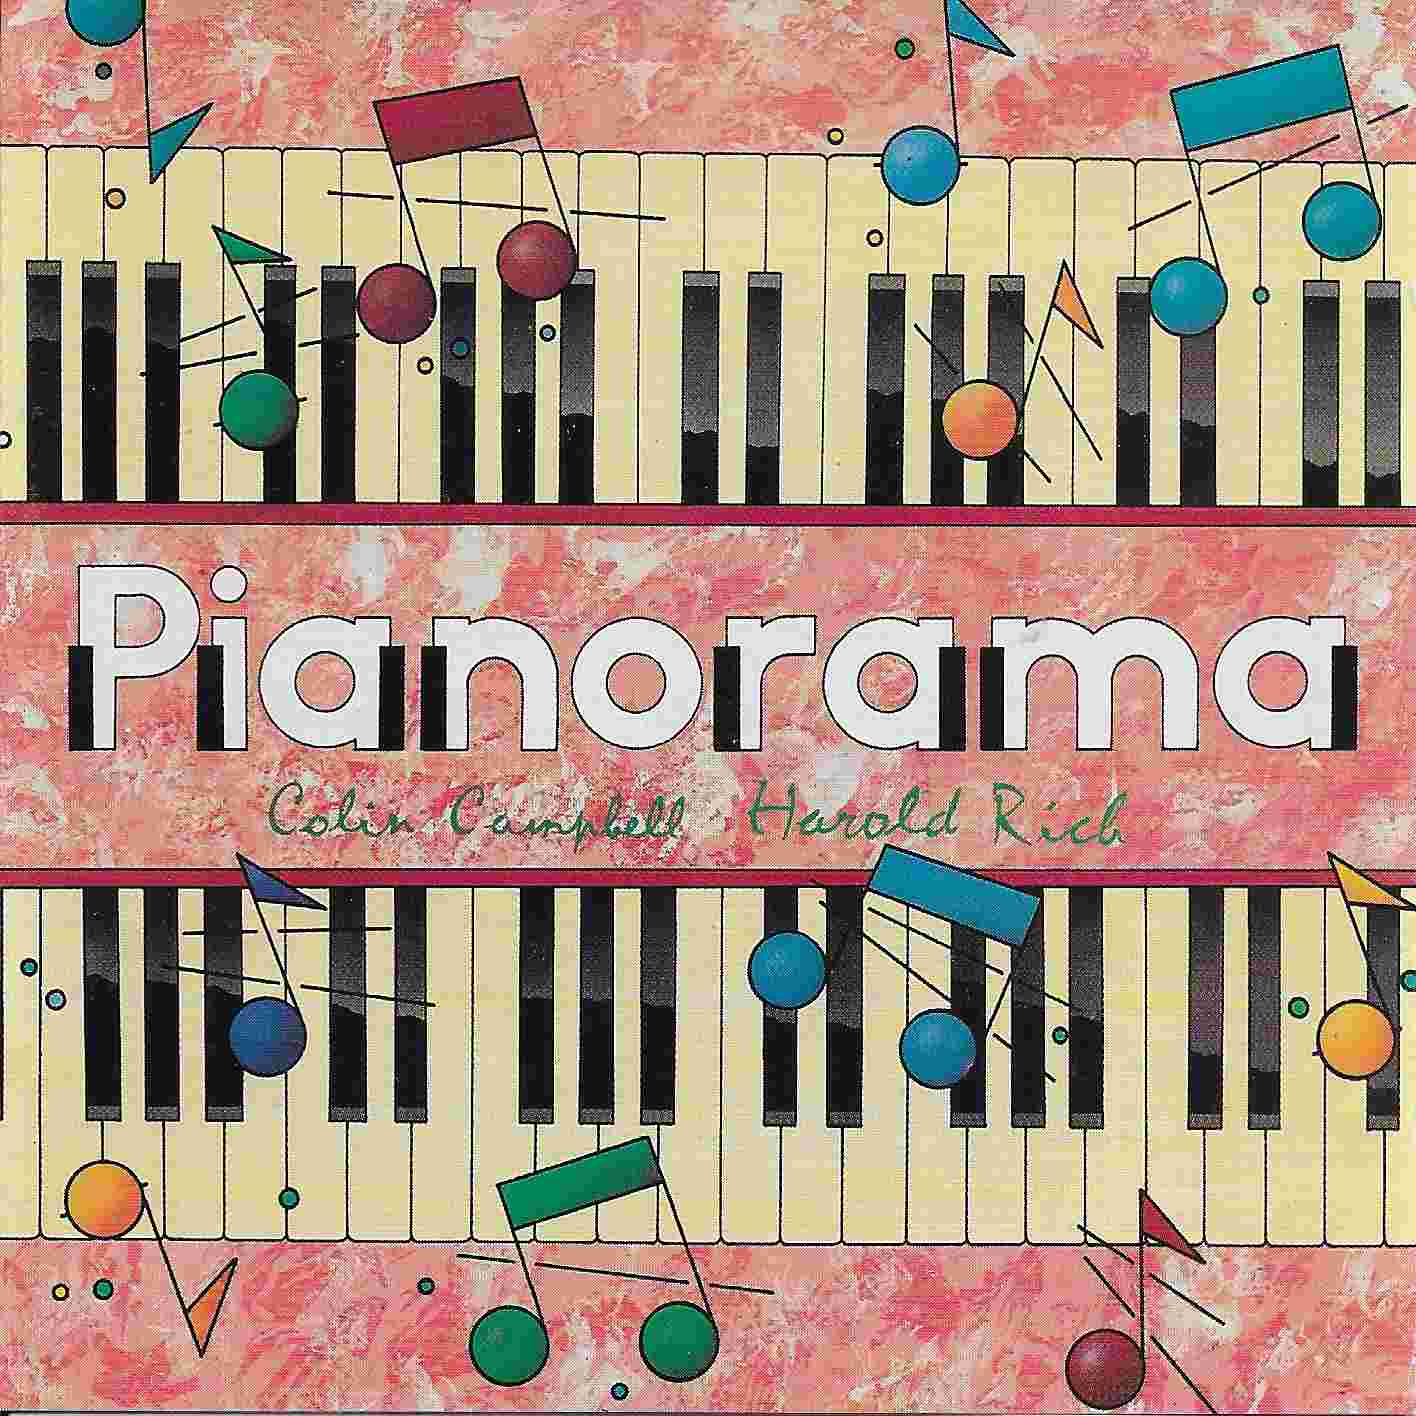 Picture of BBCCD674 Pianorama by artist Harold Rich / Colin Campbell from the BBC cds - Records and Tapes library